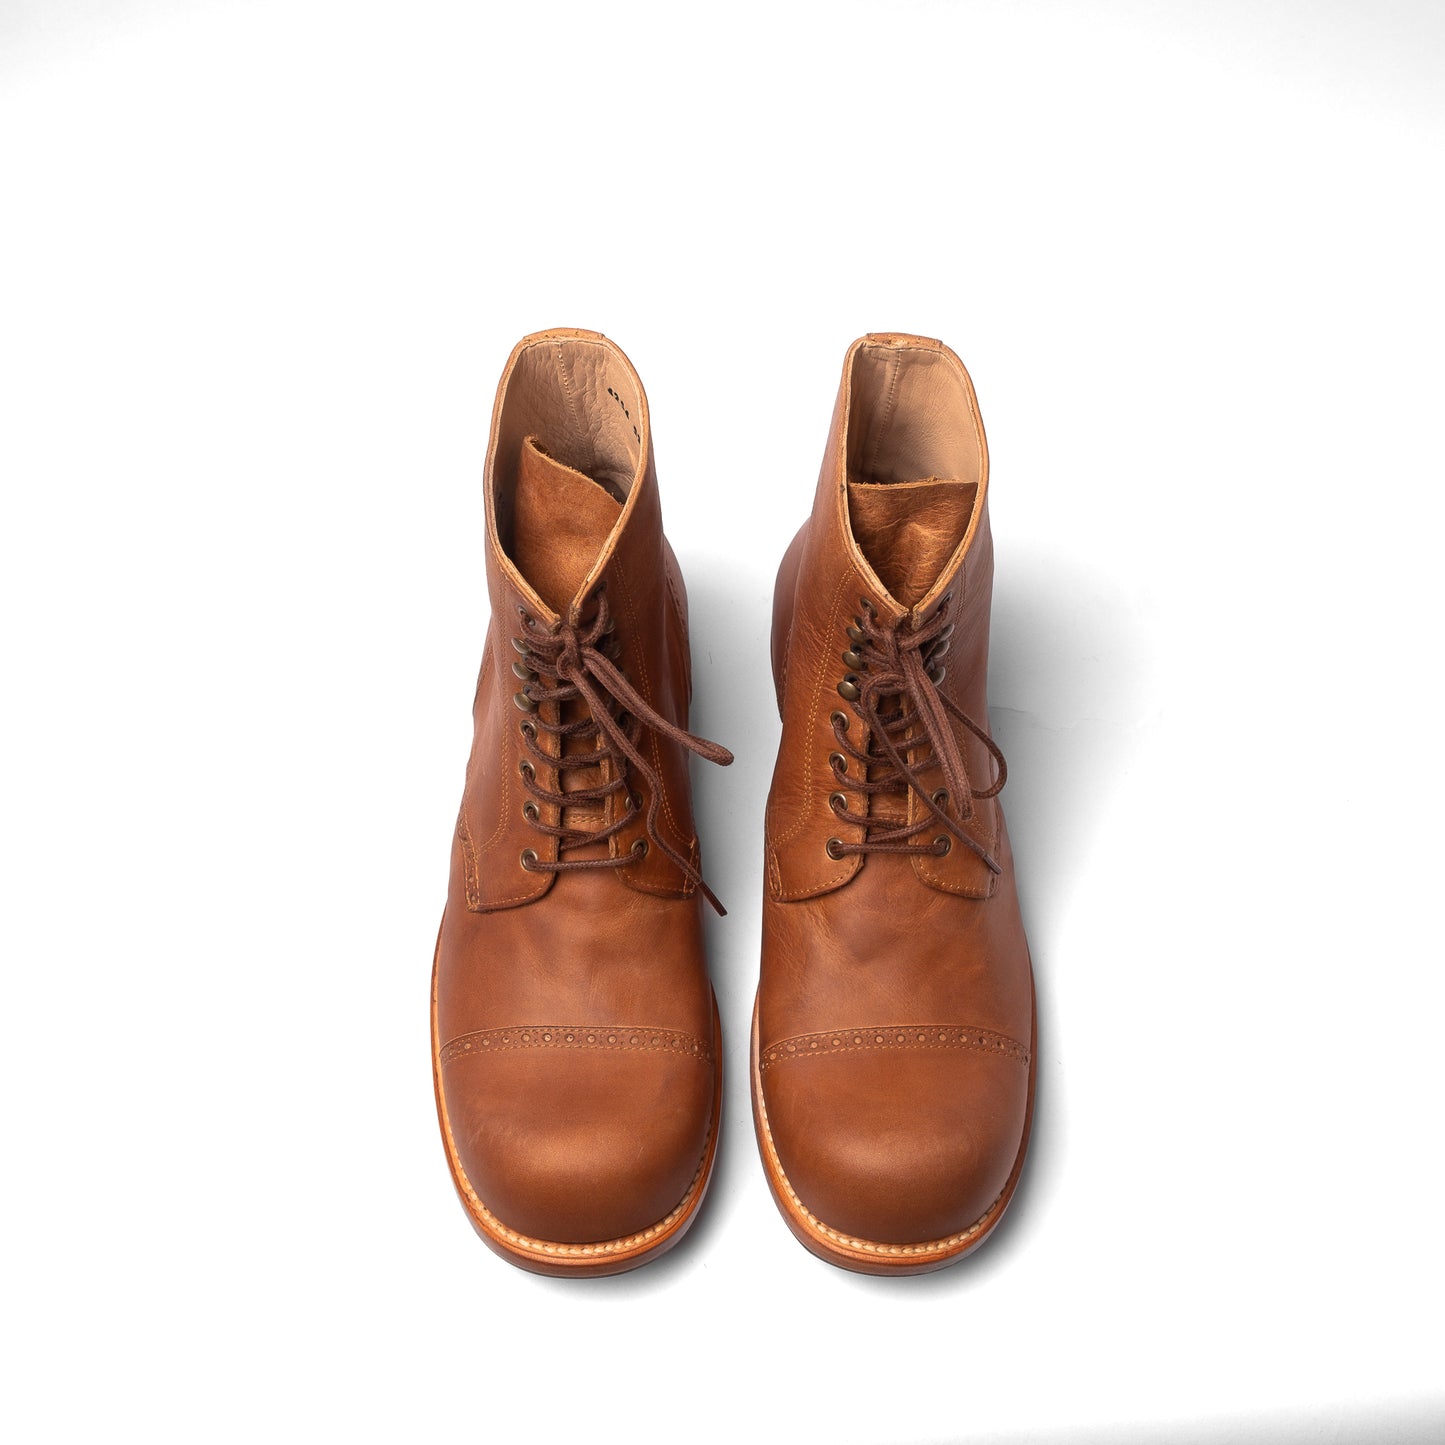 HOBO SHOES - CHARLY DERBY amarettini